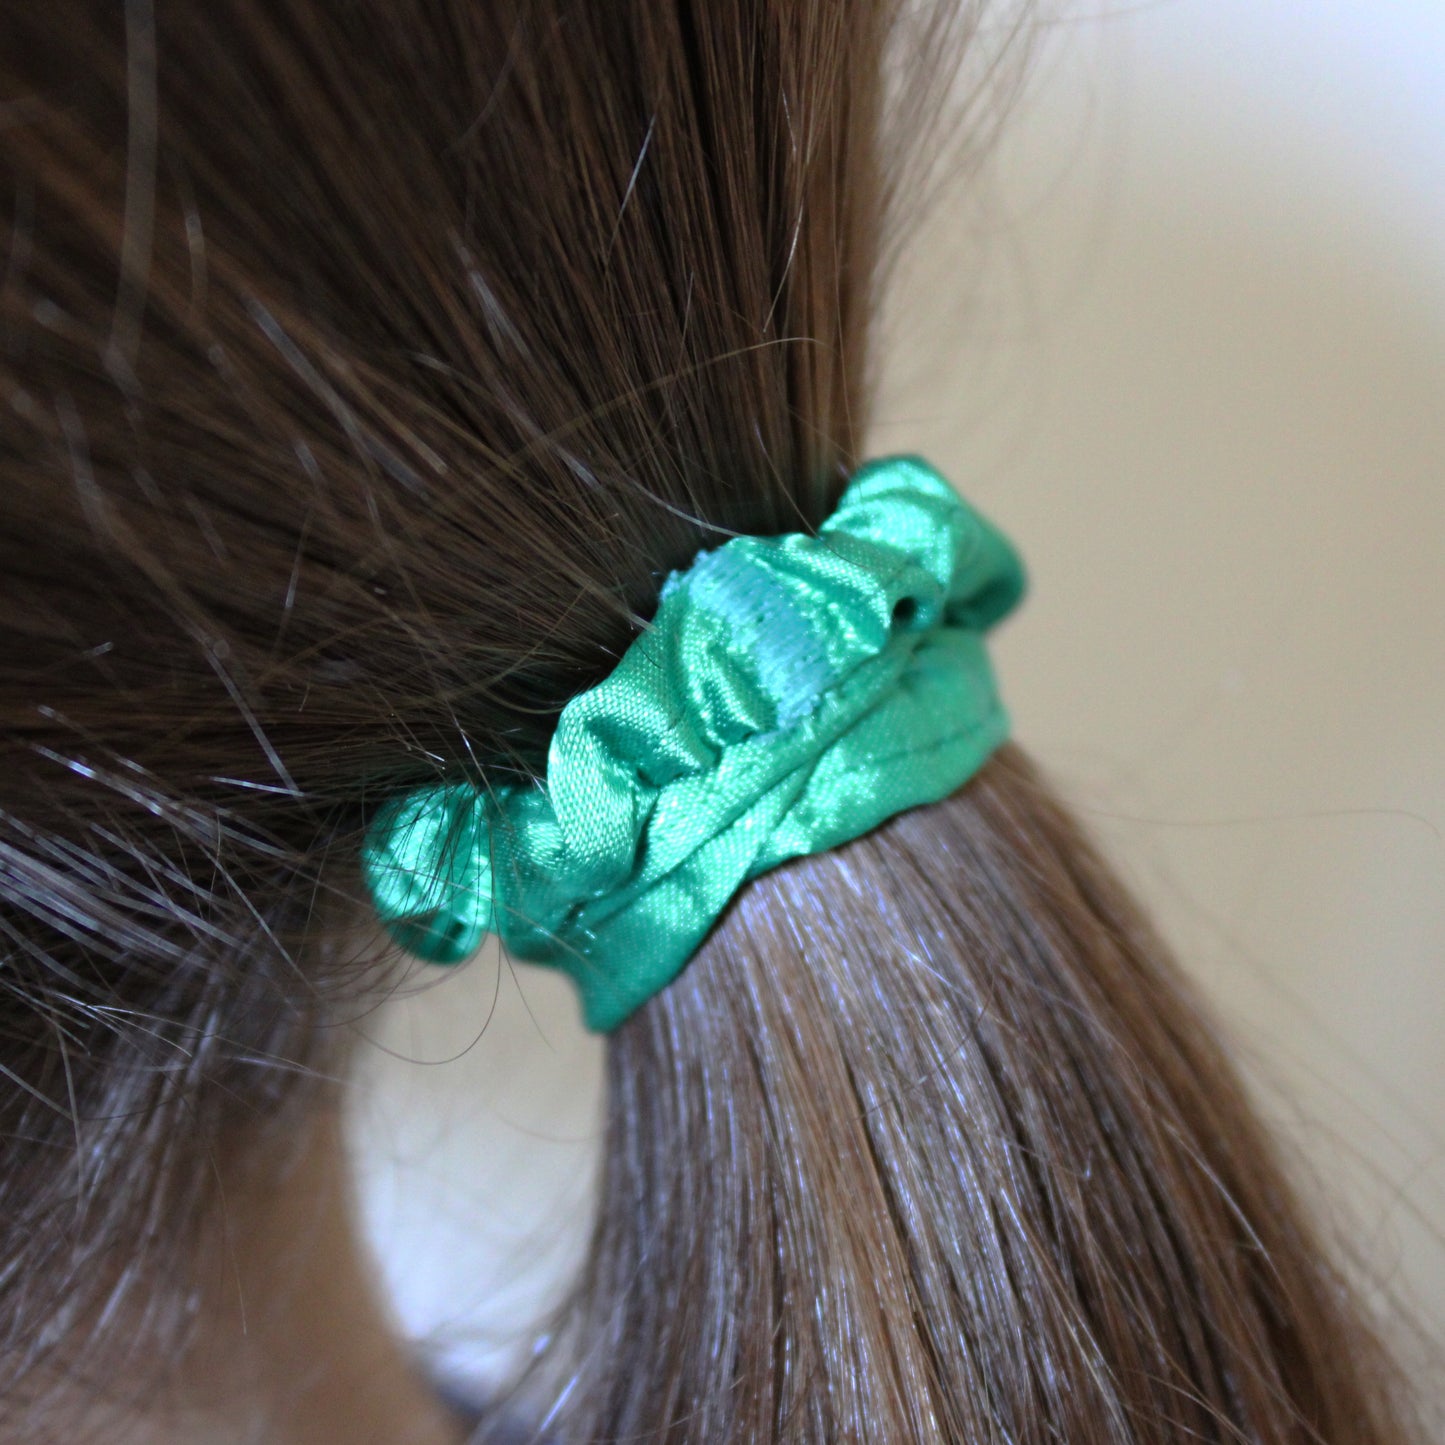 Amelia Beauty, Green Skinny Satin Scrunchies, 2in Diameter, Gentle and Strong Hold, No Snag, No Dents or Creases. 12 Pack